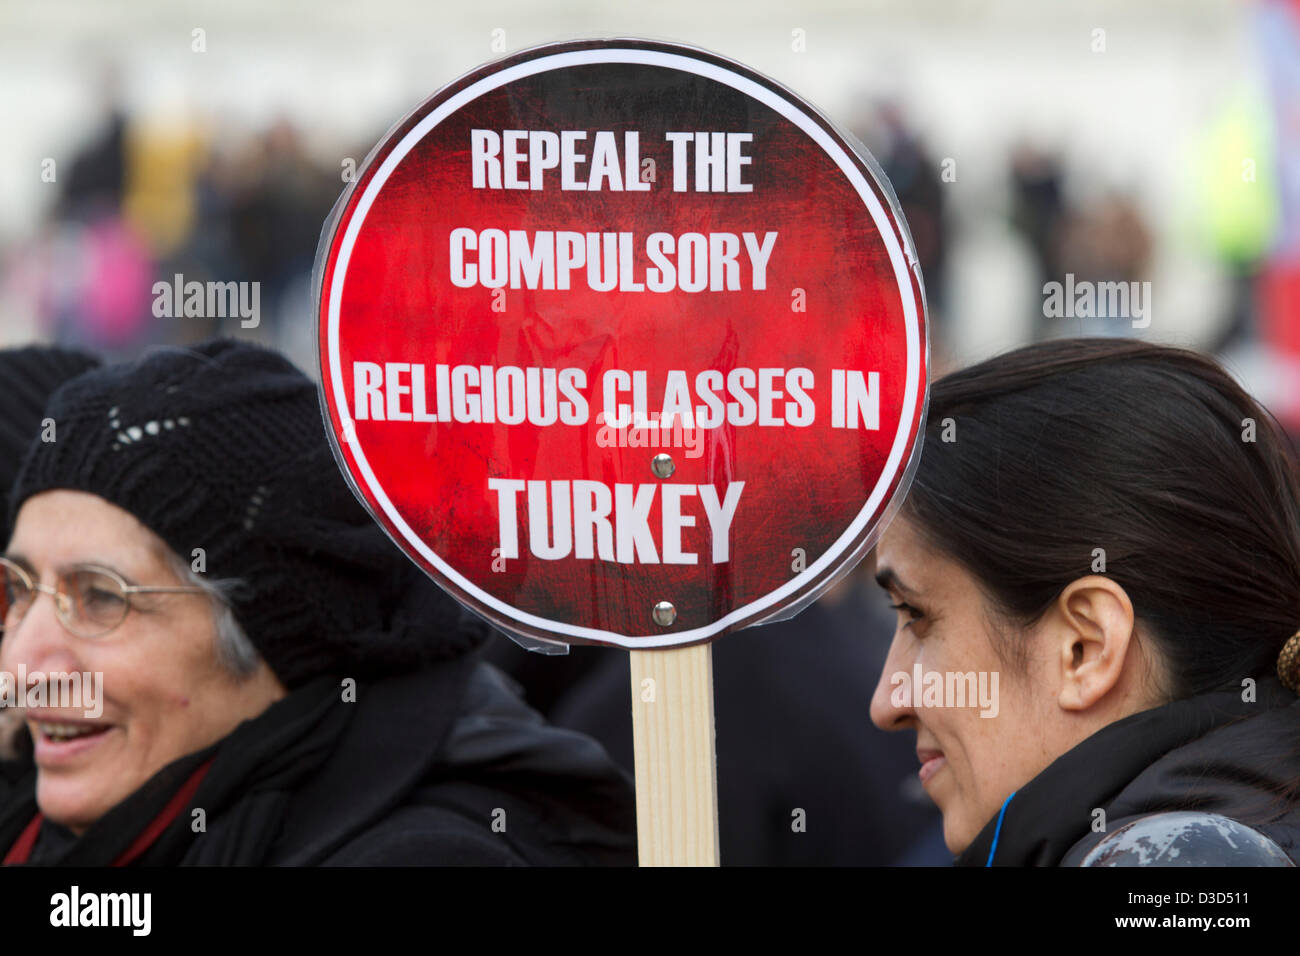 16th February 2013. London UK. Members of the British Turkish Alevi community stage a rally in Trafalgar square to demand greater equality for their religious beliefs in Turkey. Alevism developed out of Shia Islam and it is estimated the Alevi community in Turkey is between 10 and 20 million. Alevis have been the target of historical and recent repression. Credit: Amer Ghazzal/Alamy Live News Stock Photo